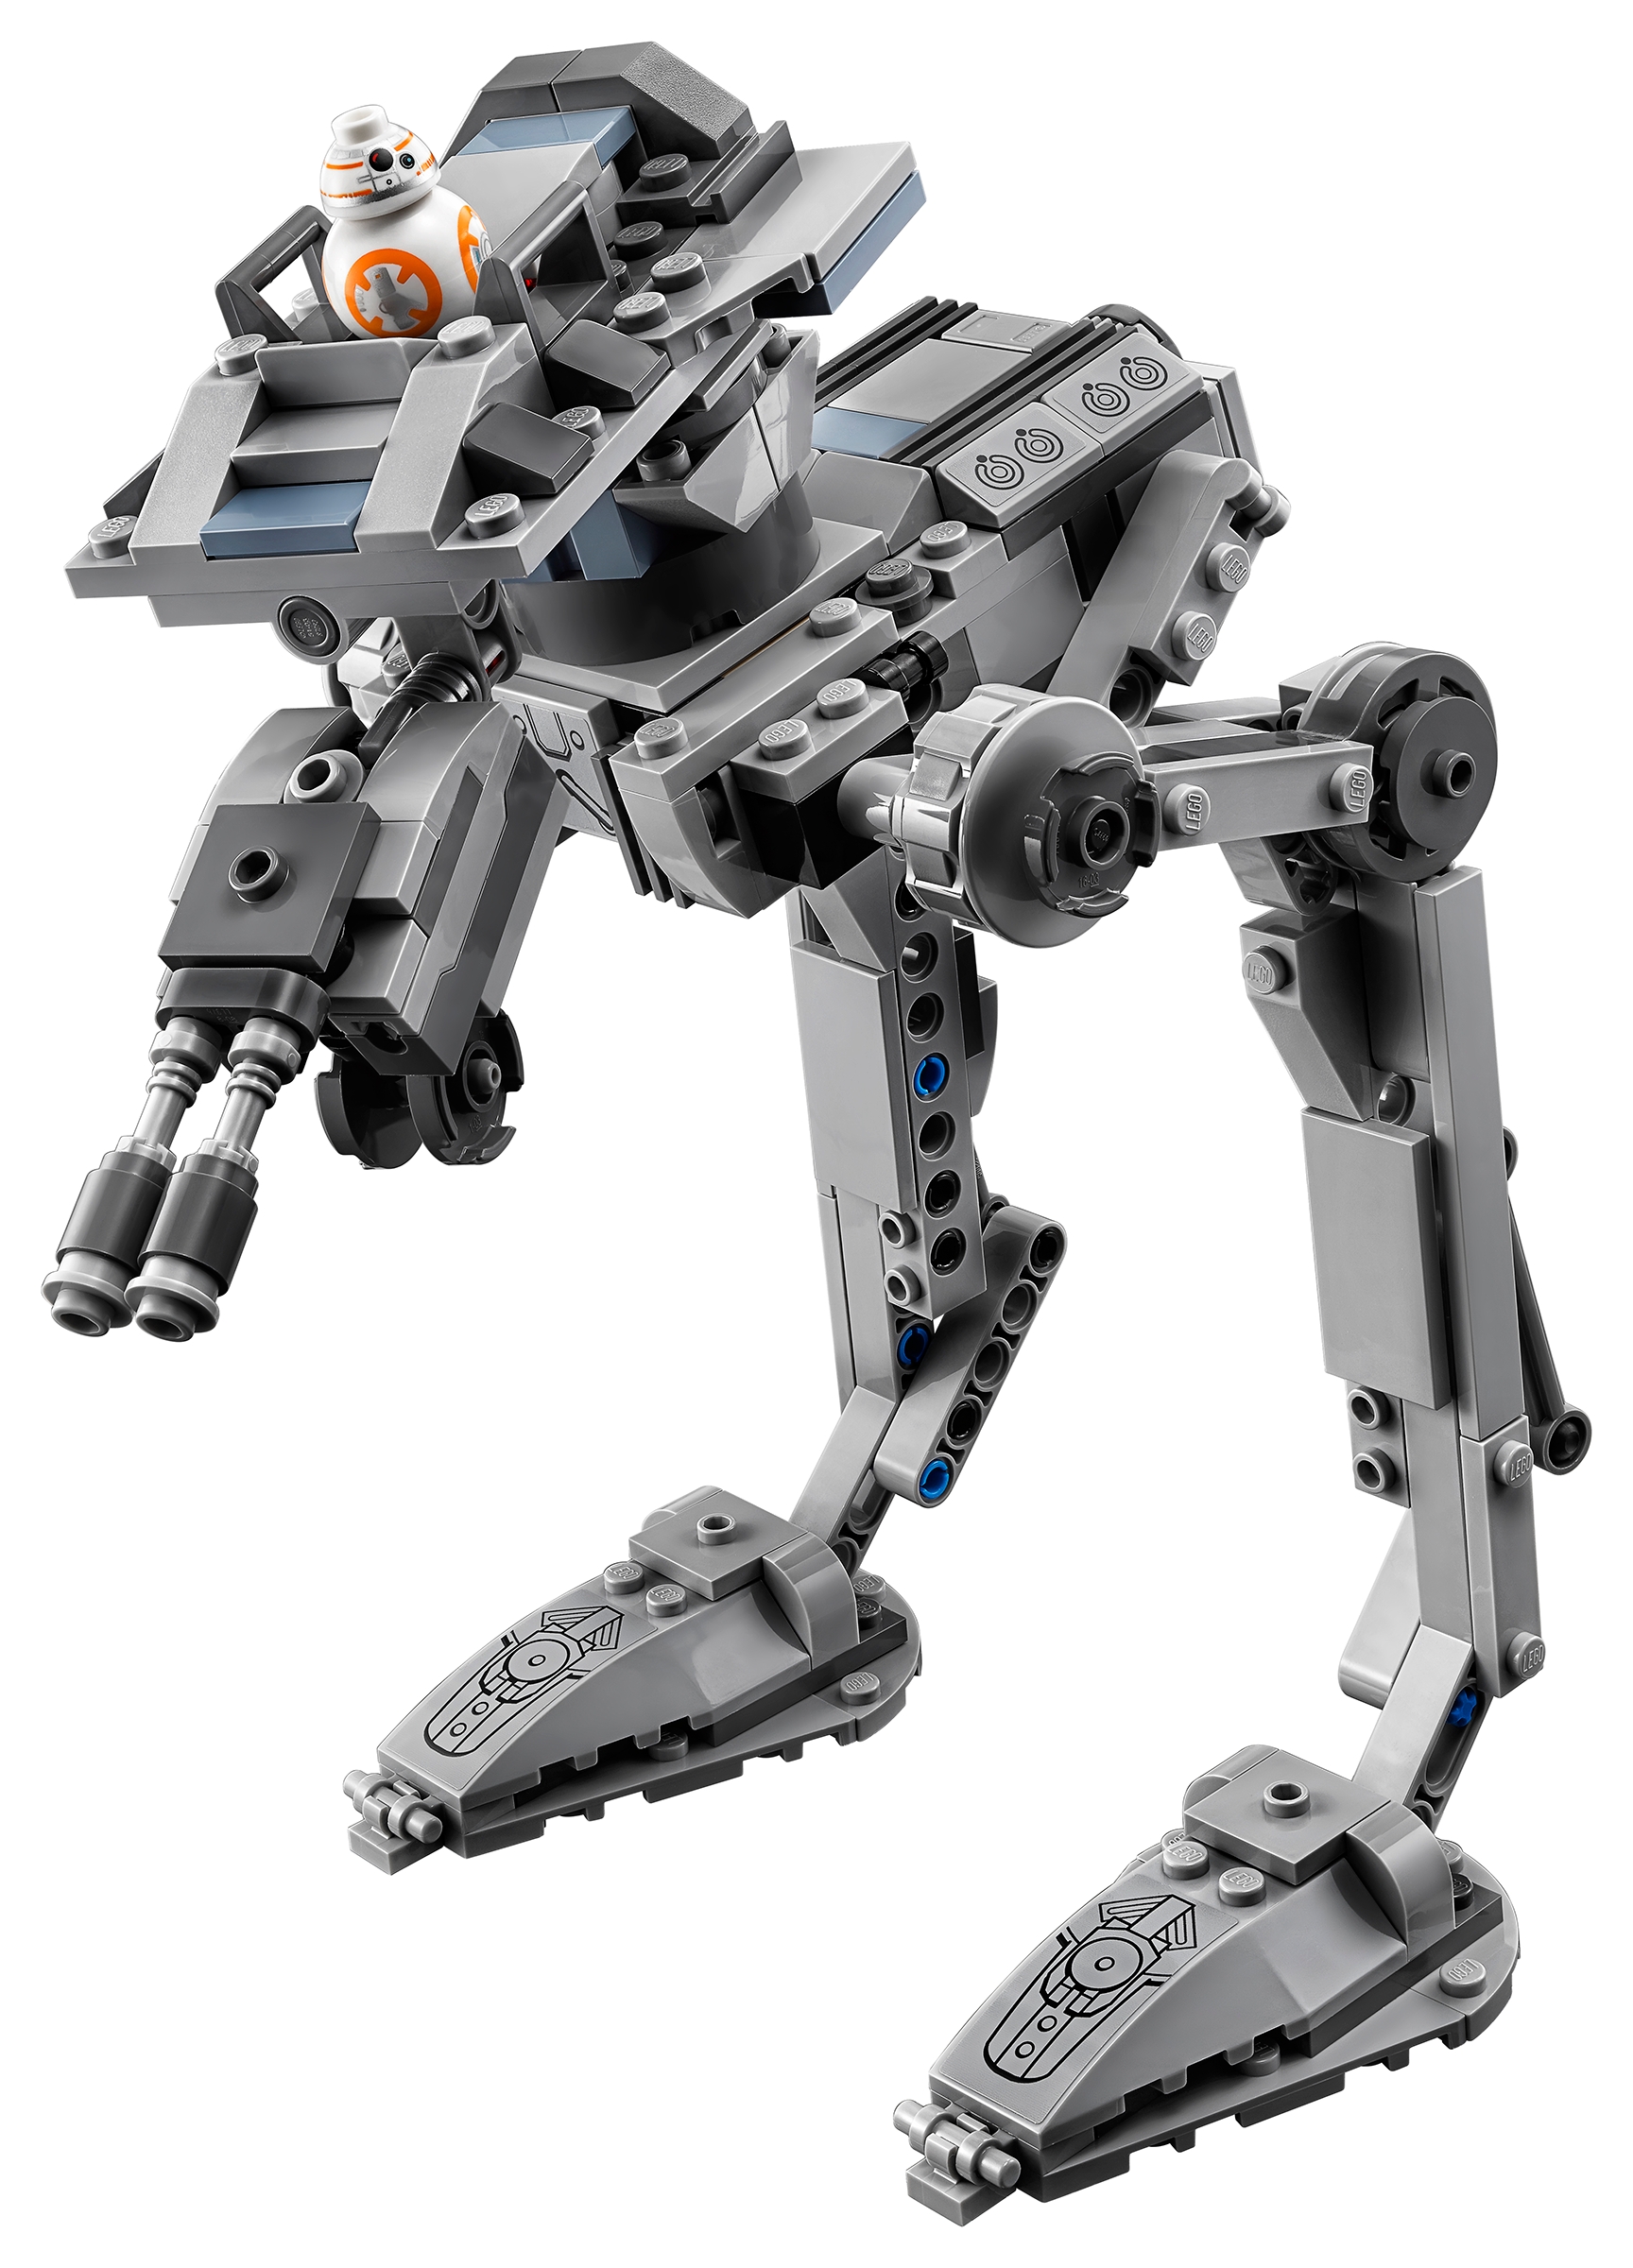 LEGO Star Wars 75201 First Order AT-ST reveals The Last Jedi